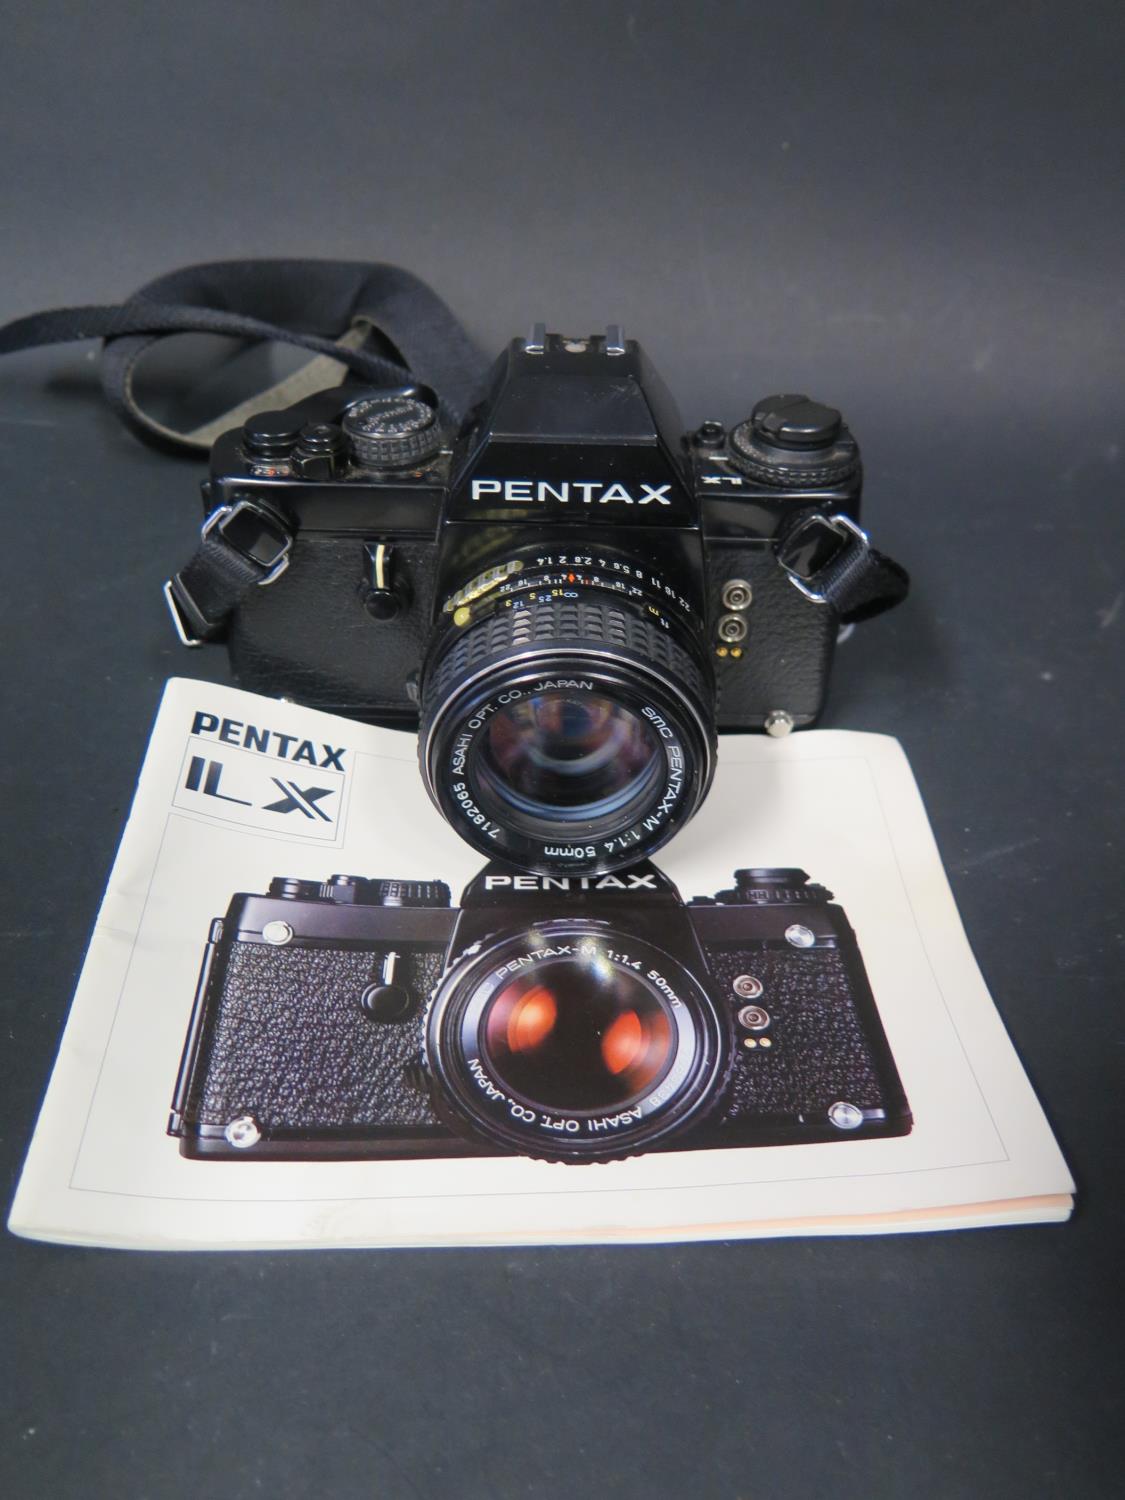 A Vintage Pentax SLR Film Camera with SMC Pentax-M 1:1.4 50mm Lens with manual